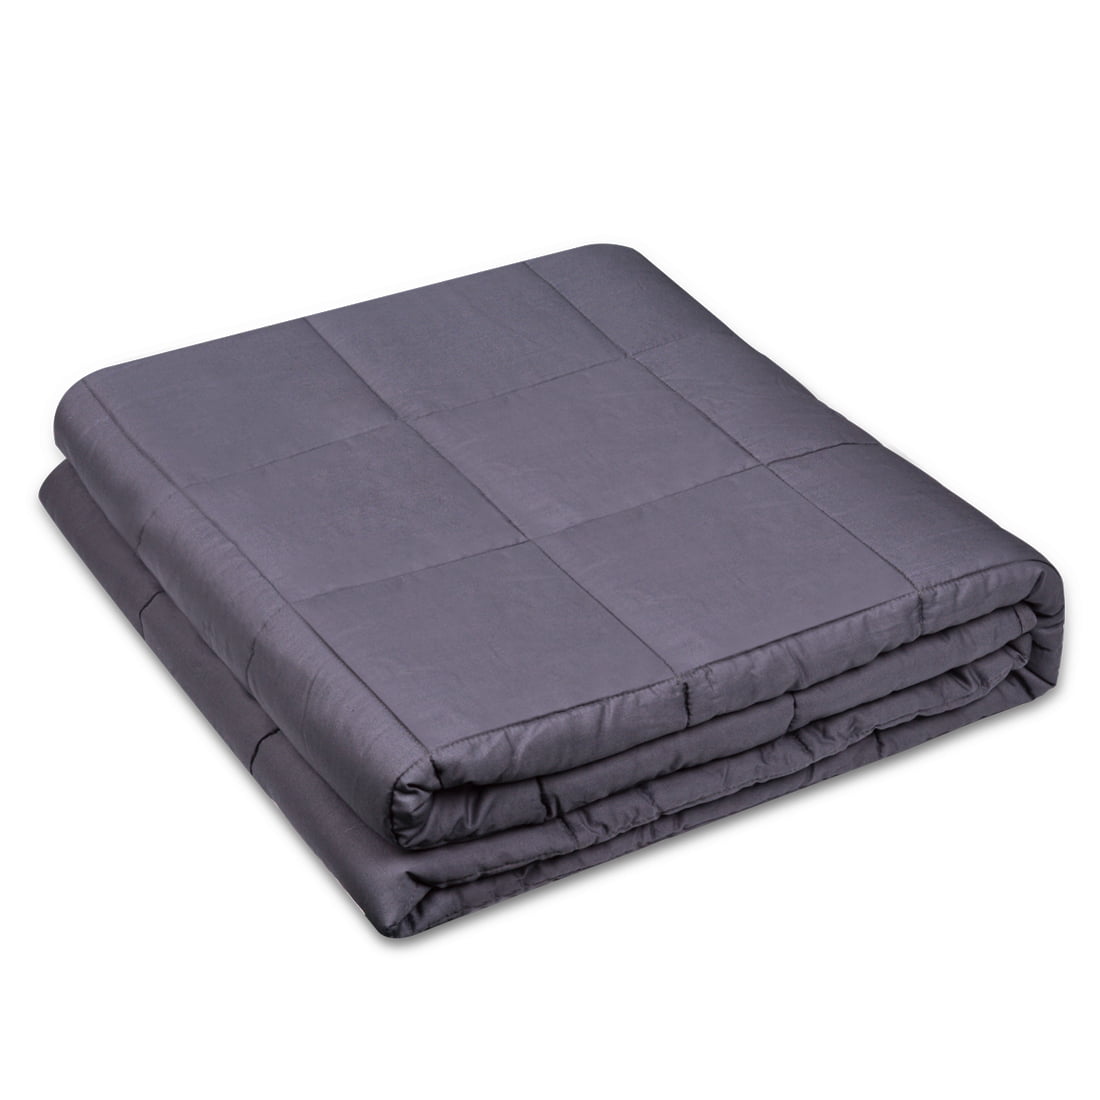 Beautyrest weighted blanket 15 Lb Gray Velvet 48 X 72 Removable cover twin 